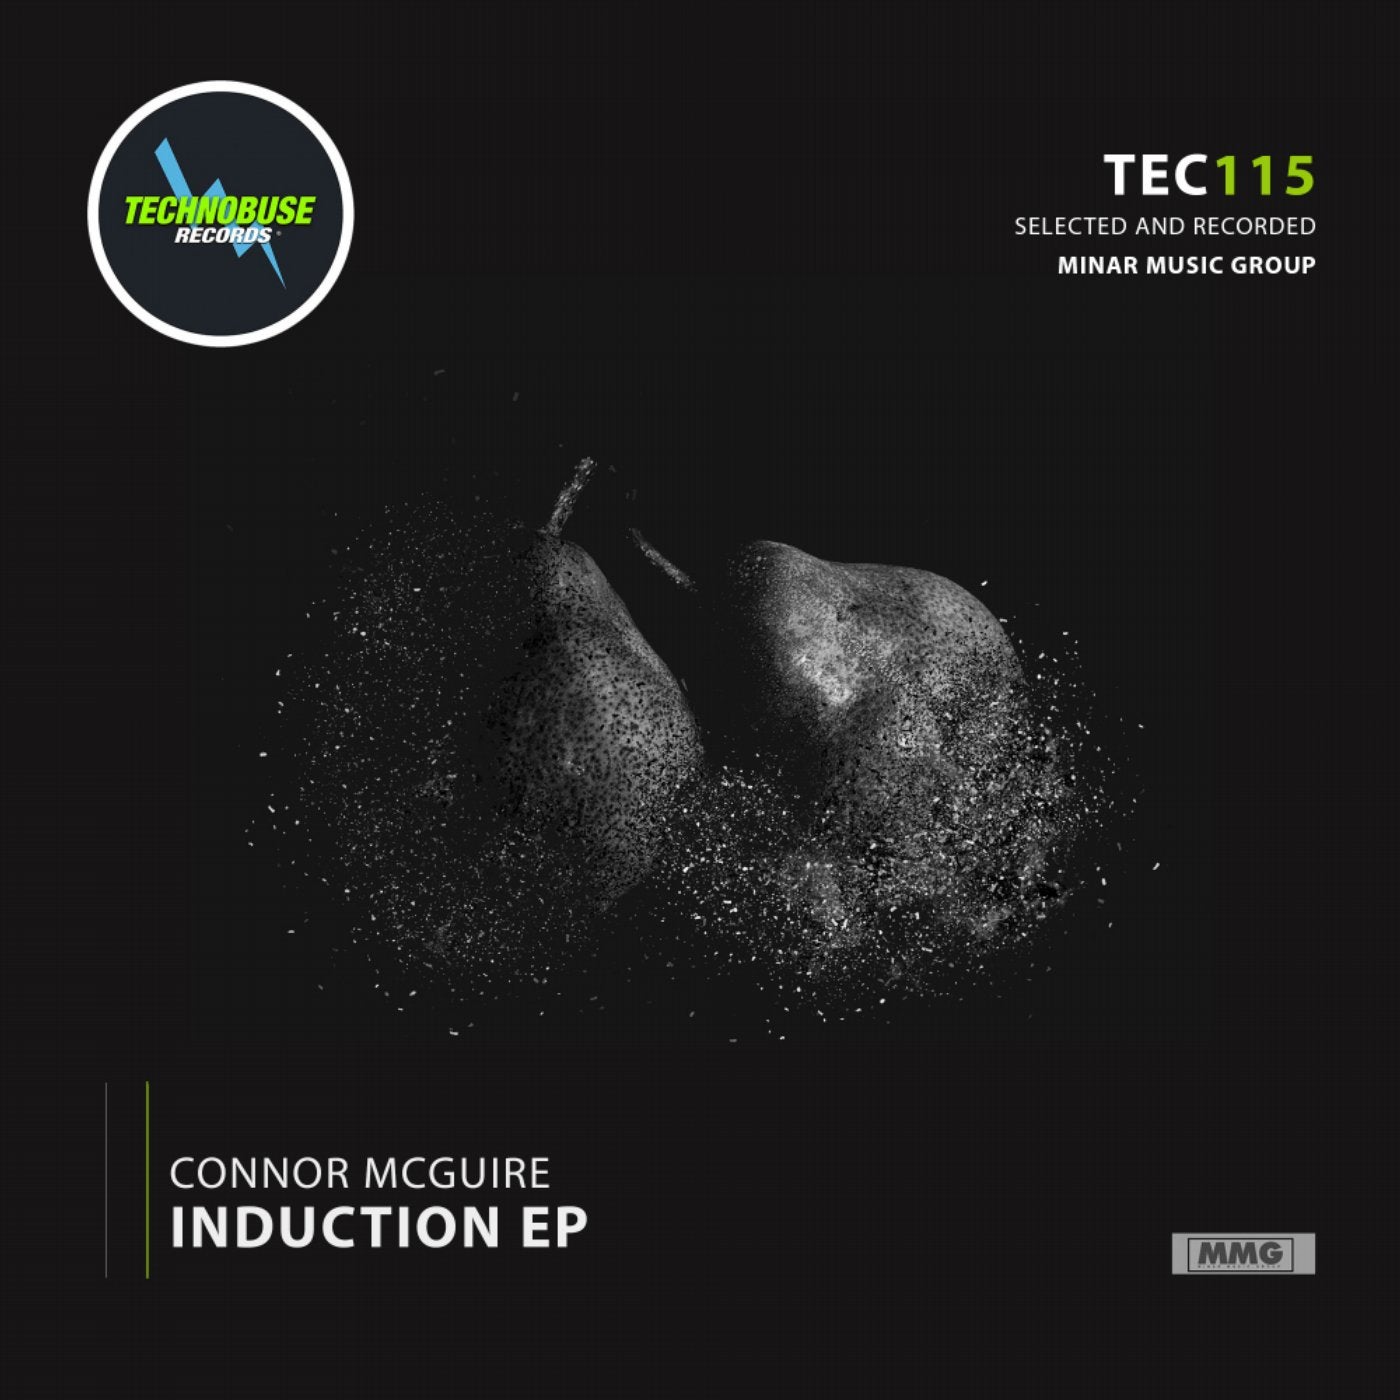 Induction EP